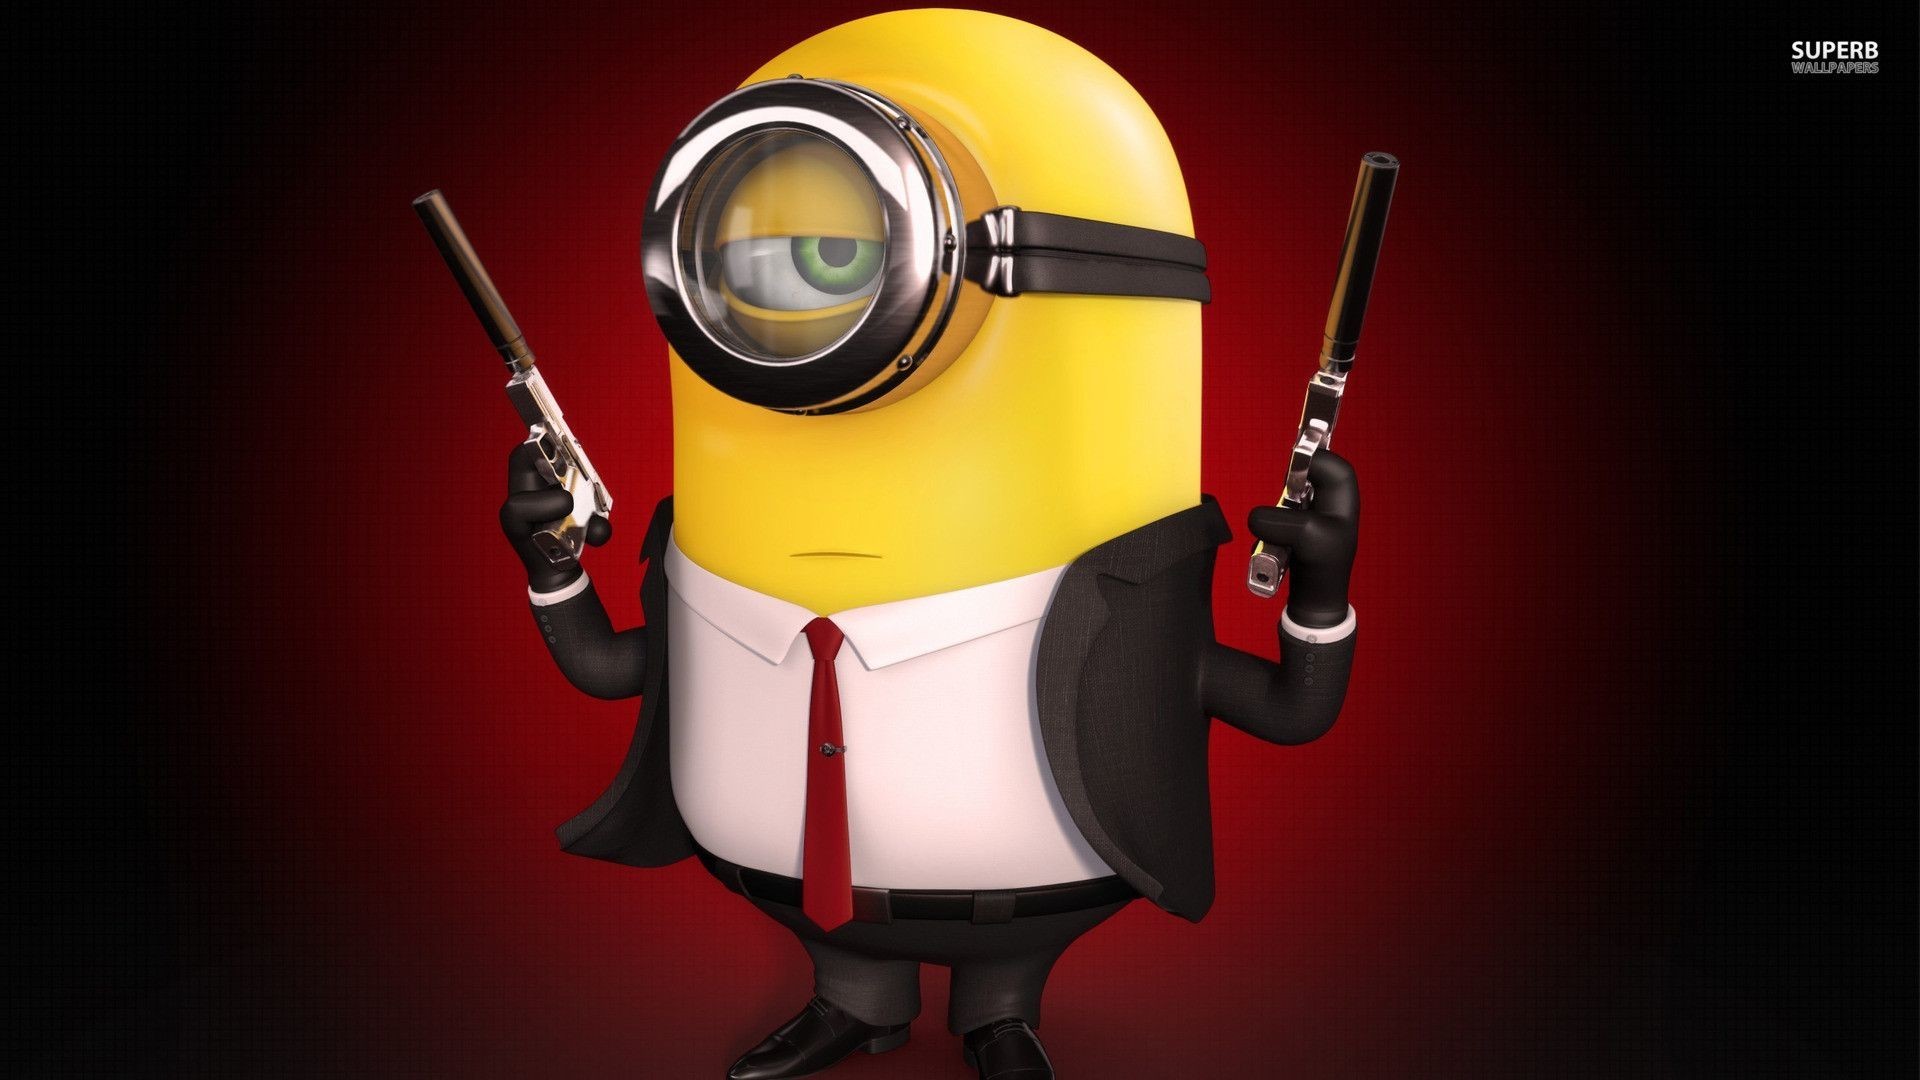 1920x1080 2560x1440 Best-funny-minions-wallpapers-and-backgrounds-hd Beautiful Best  Minion